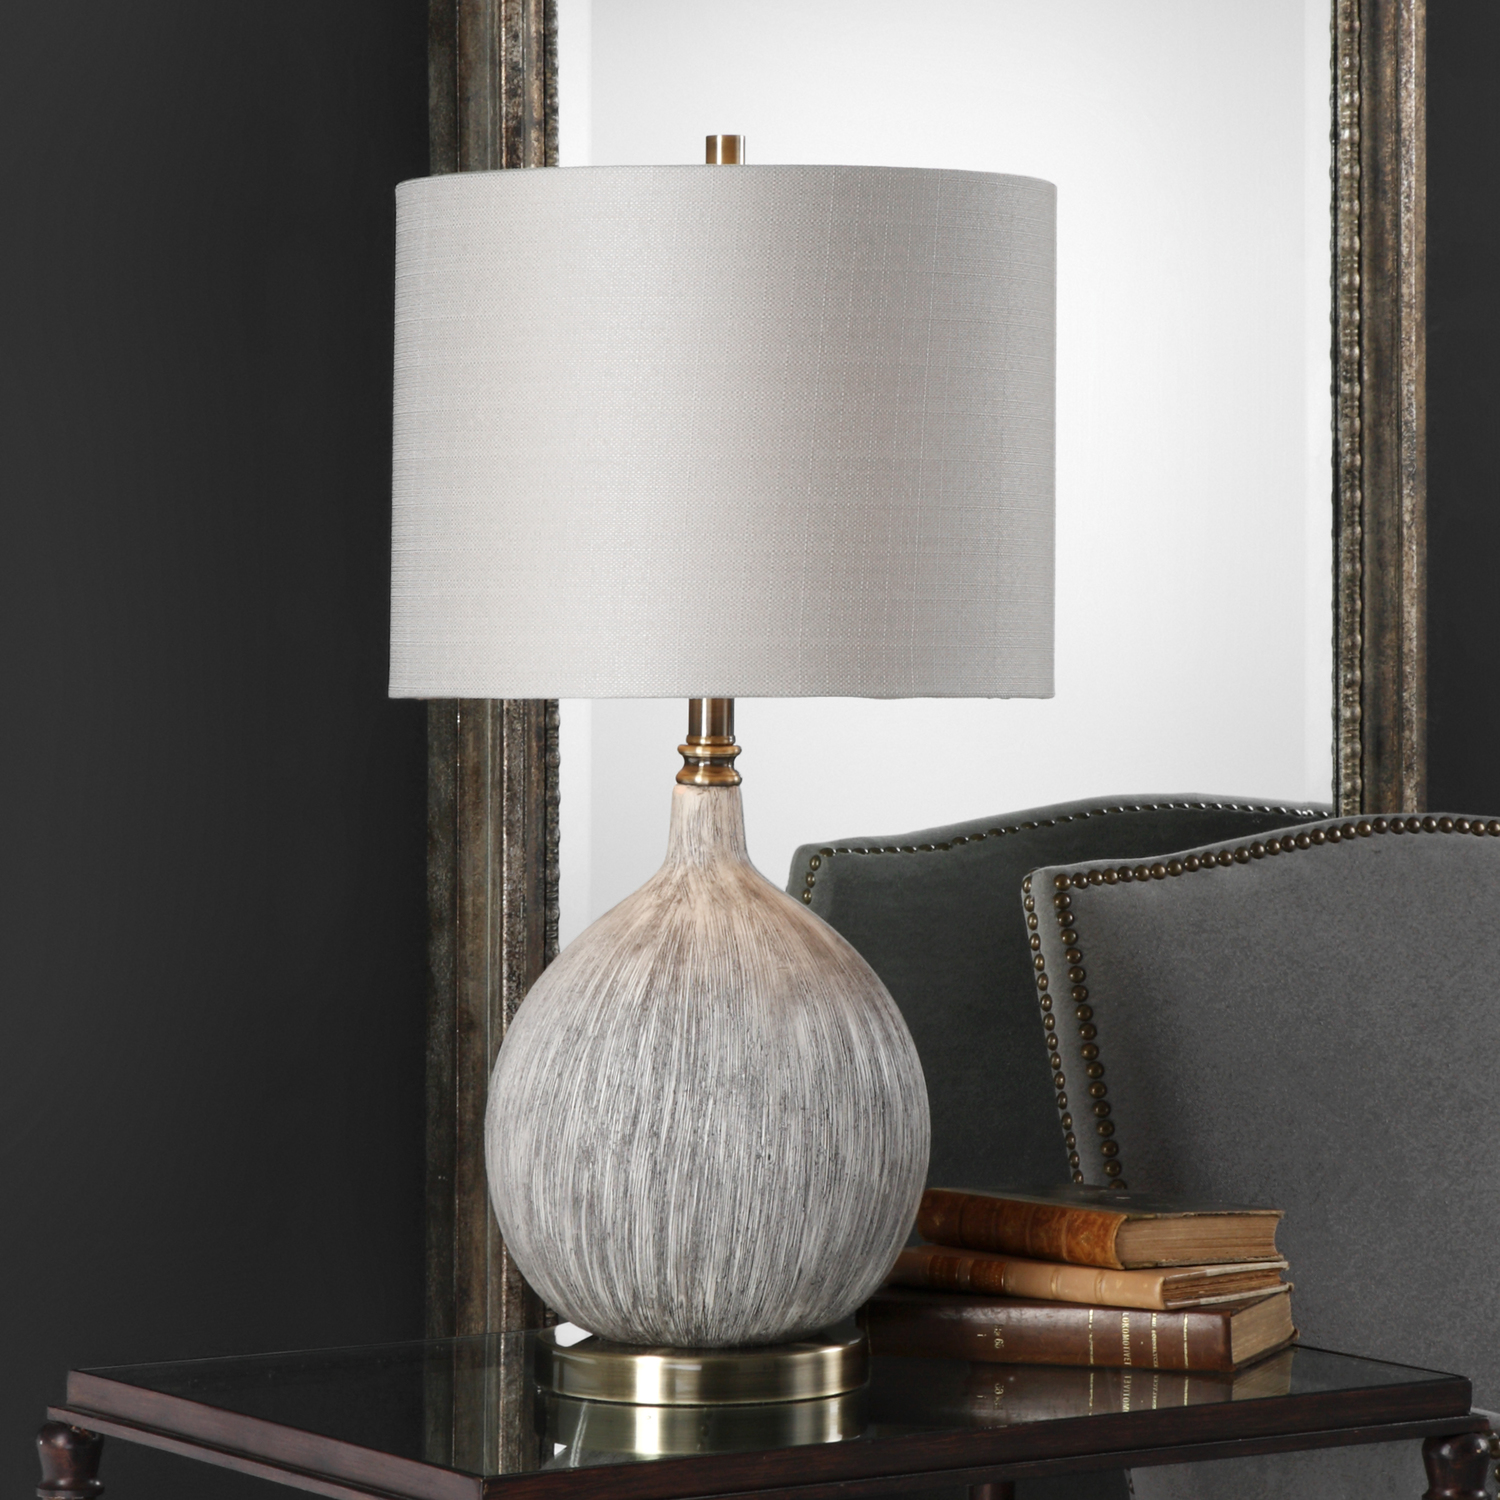 Uttermost Textured Ivory Table Lamp Table Lamps Organic Gourd Shaped Ceramic With A Heavily Textured Surface, Finished In An Old Ivory With Aged Black Undertones, Accented With Burnished Brass Plated Details.